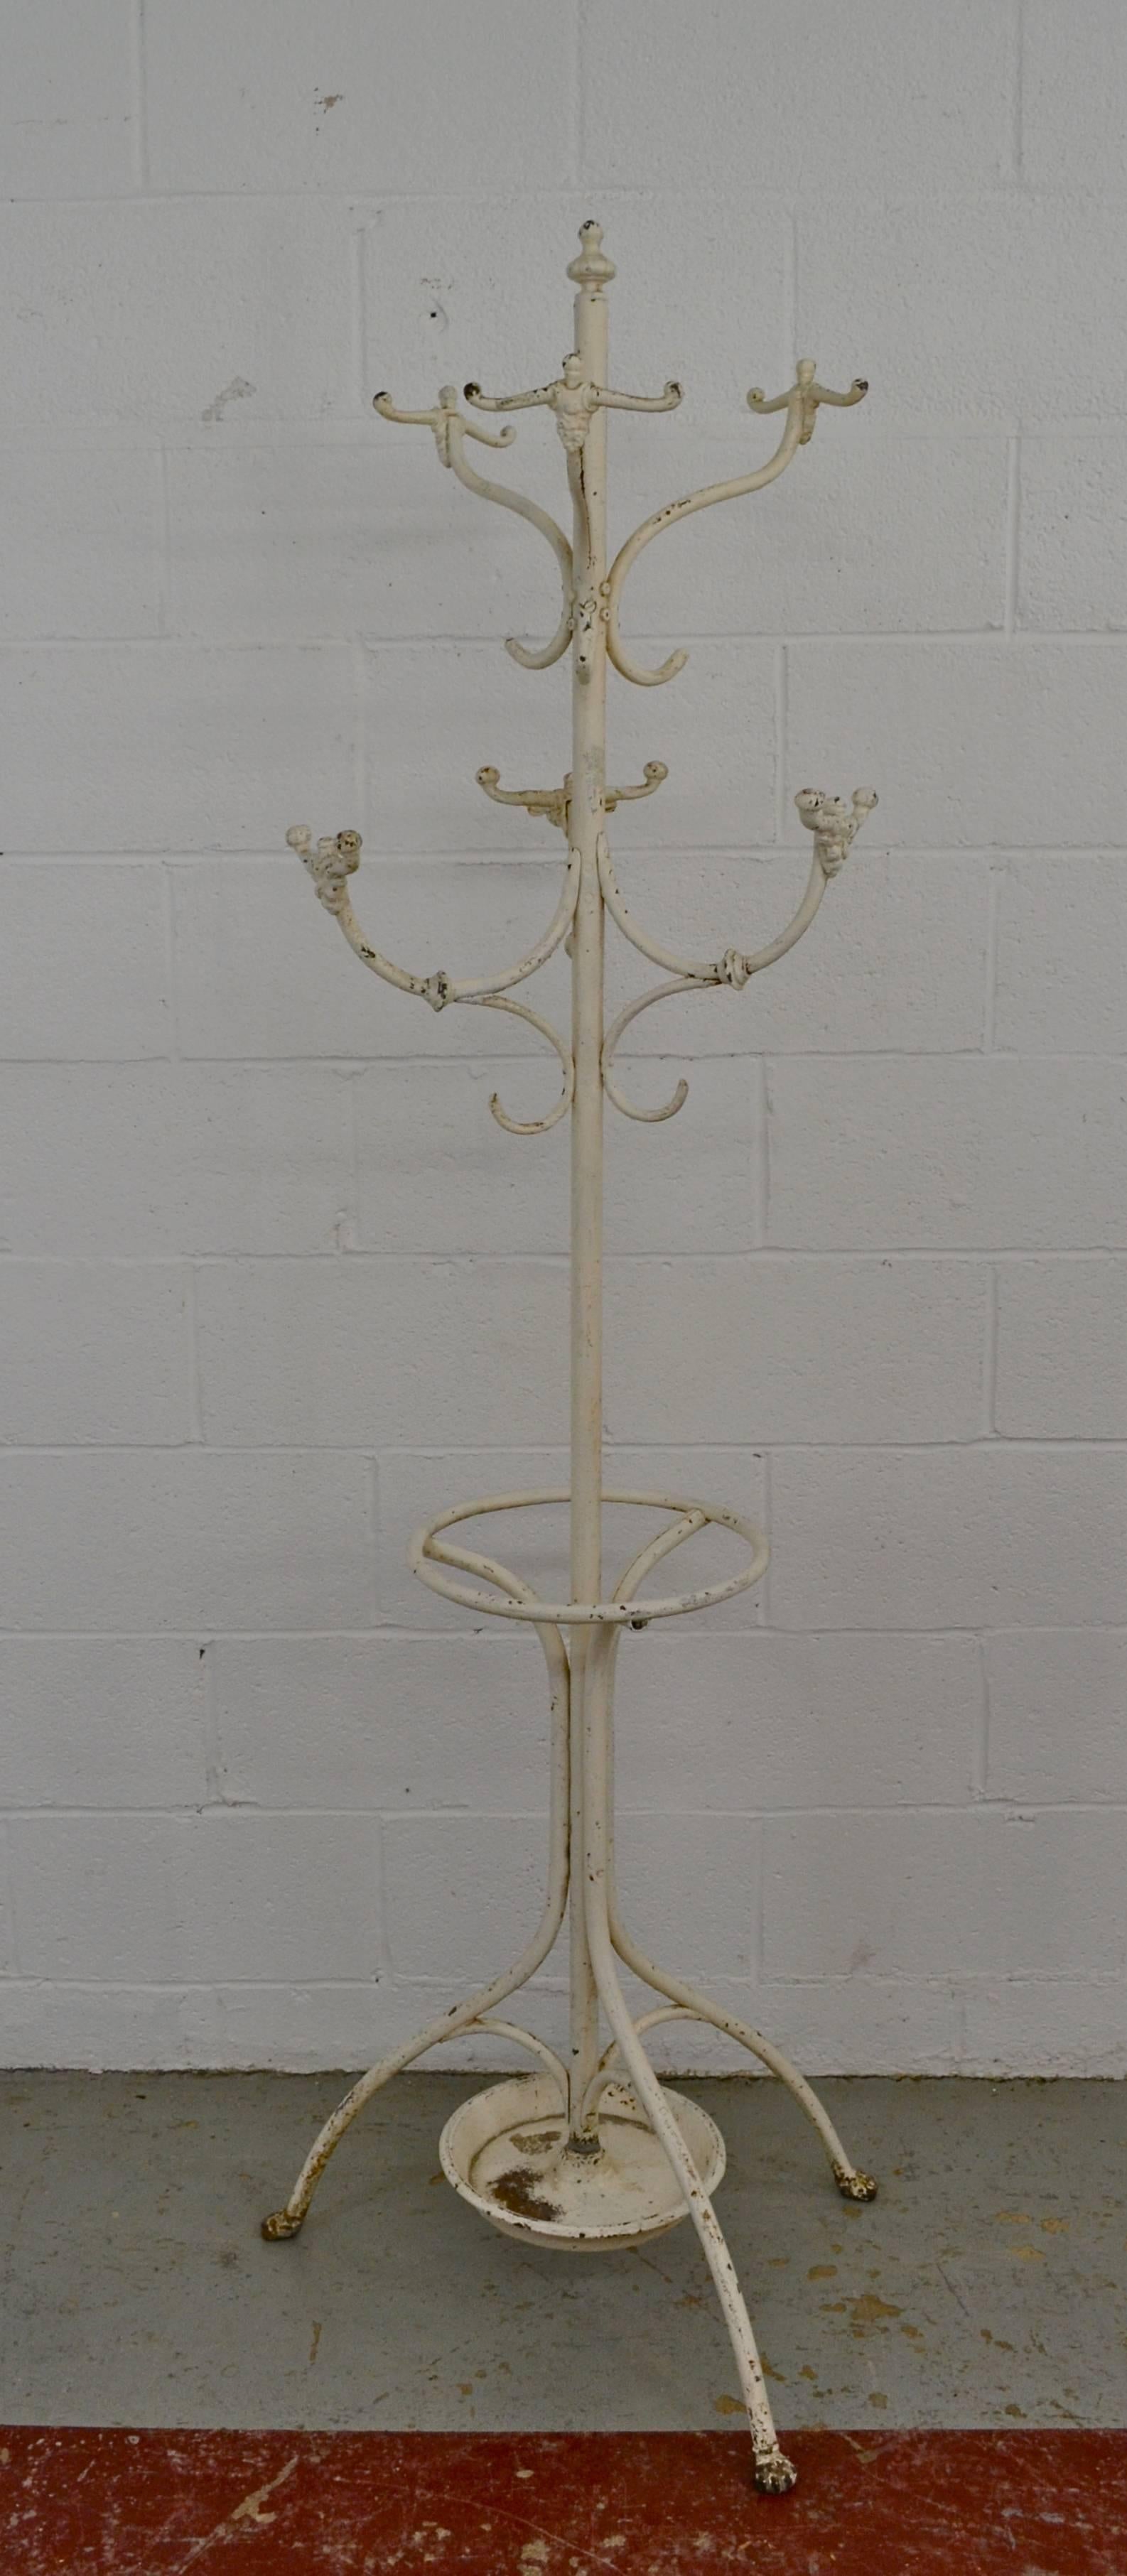 A nice example of the classic central European halltree in wrought and cast iron. Six anthropomorphic double hooks with single hooks trailing are bolted to a tubular column mounted by a decorative iron finial. A circular tube holds wet umbrellas